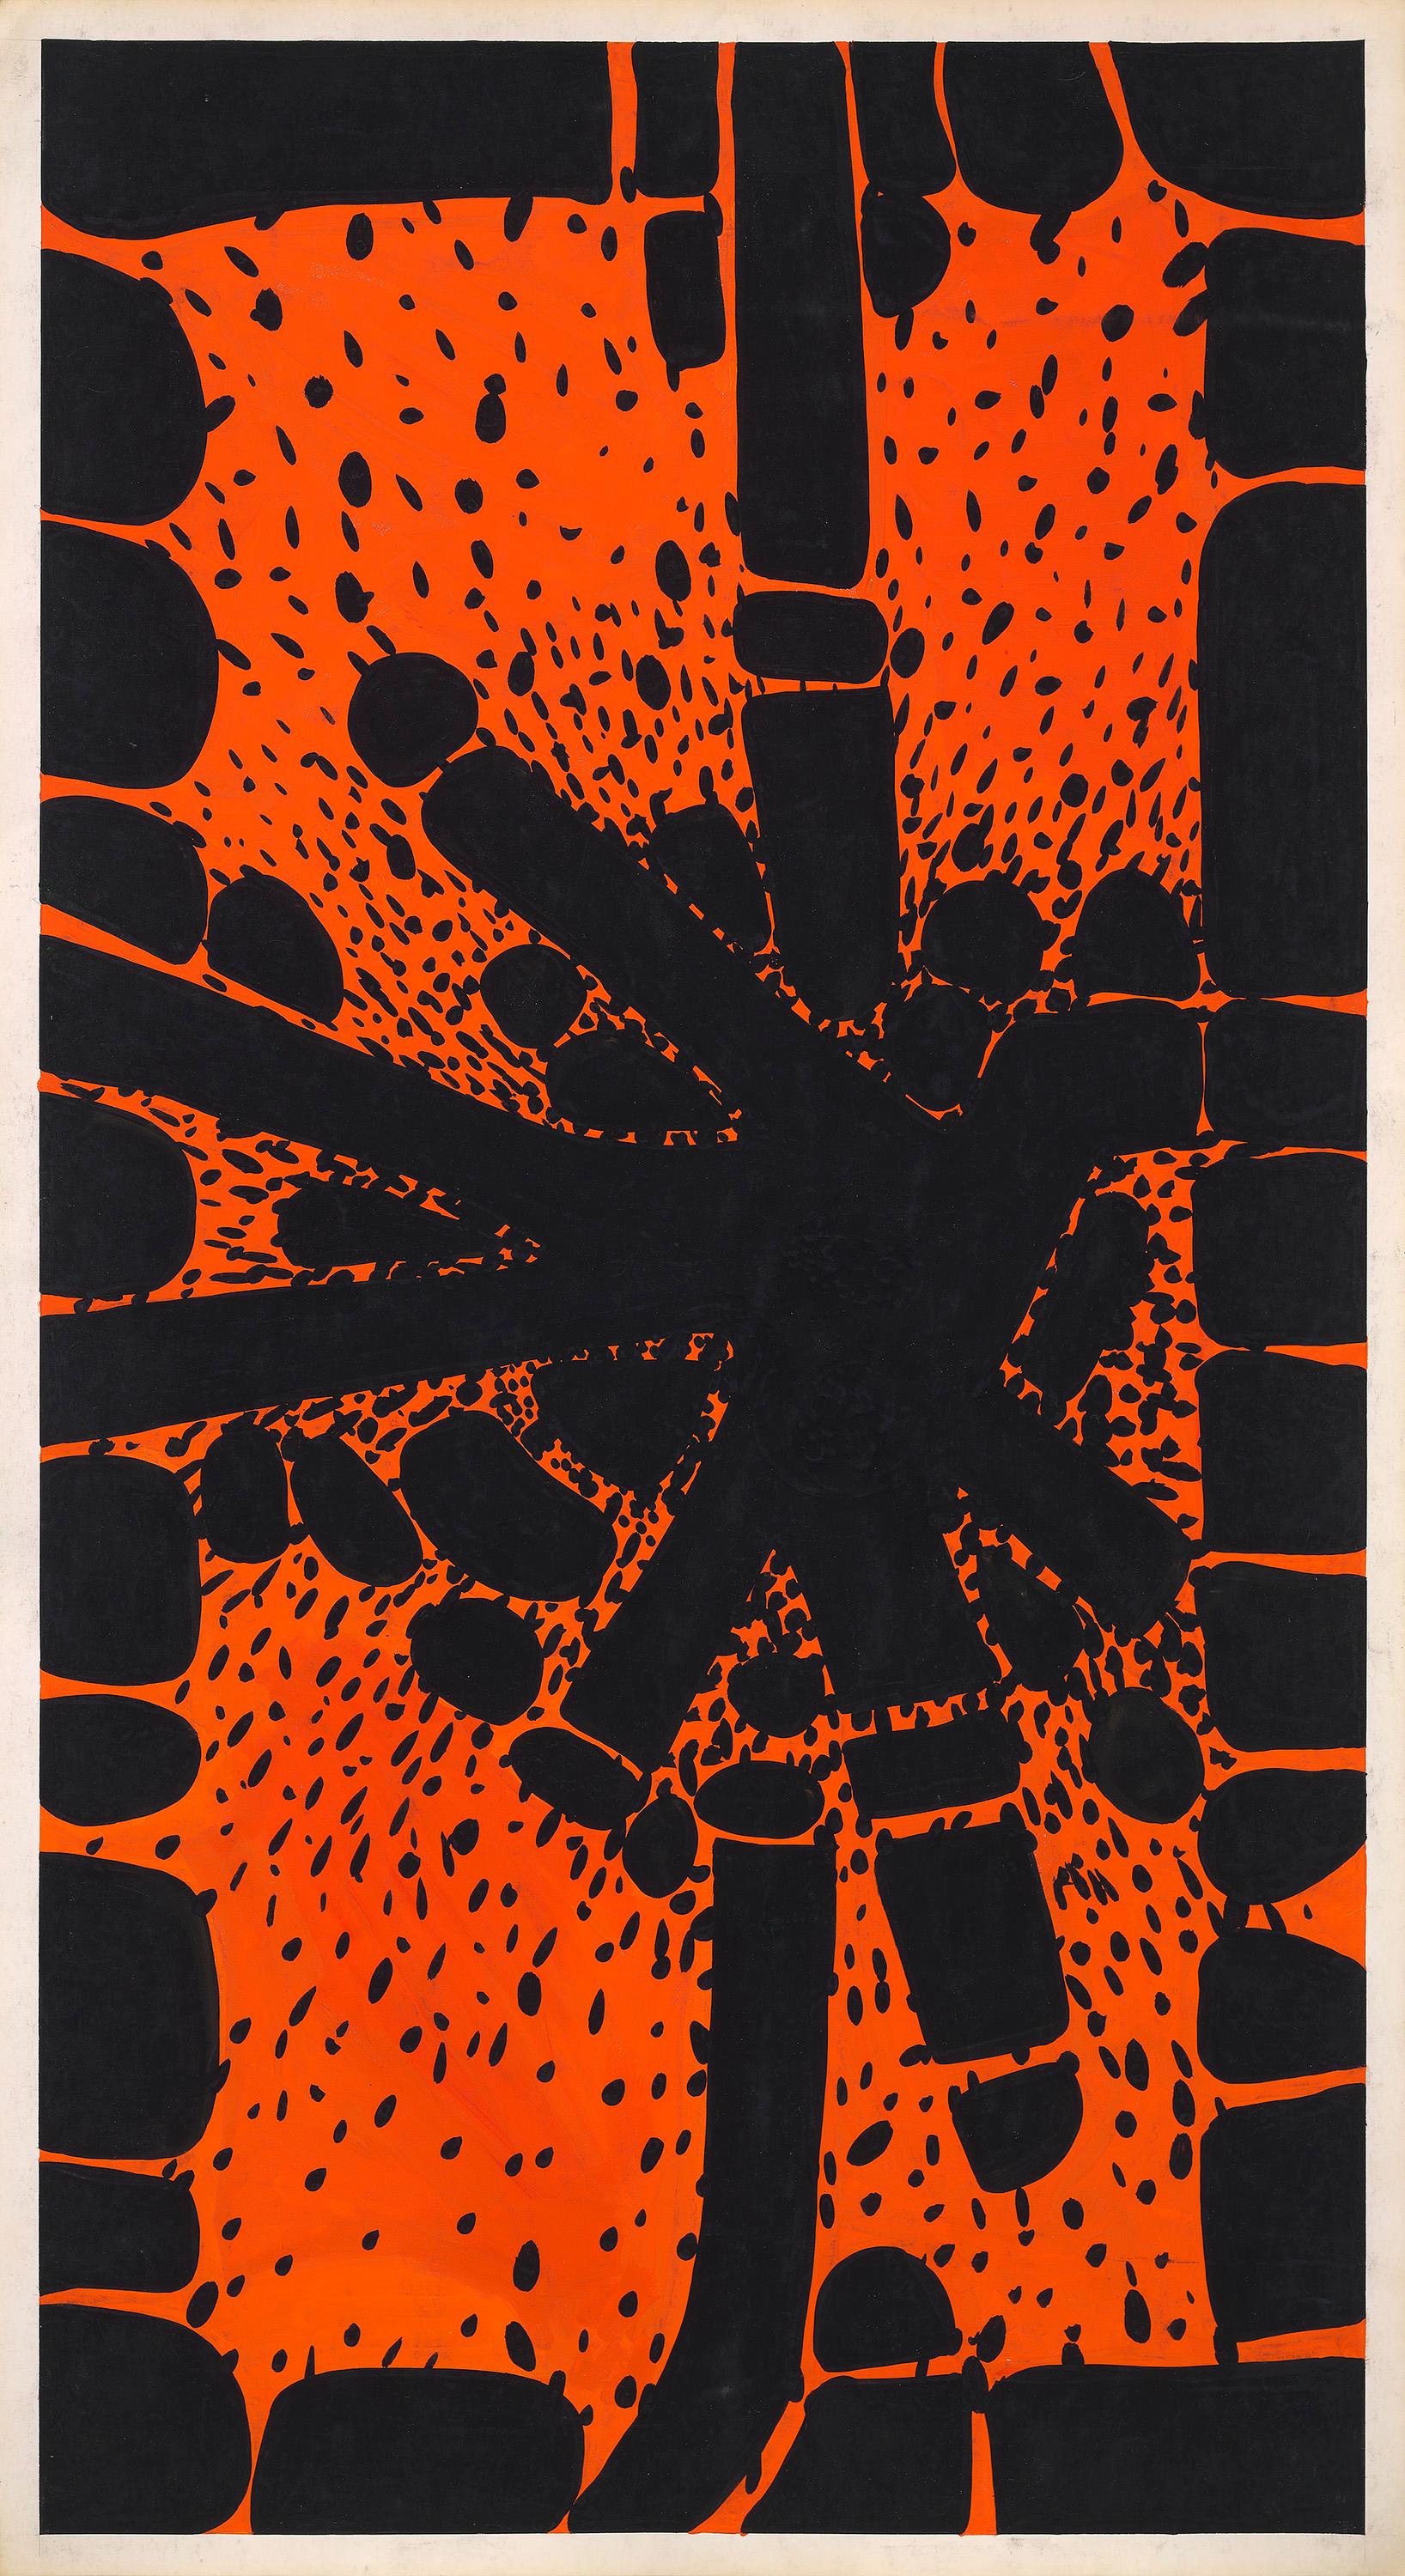 Unknown Abstract Drawing - Original 70's Hand Painted Textile Design Gouache Black & Orange on White Paper